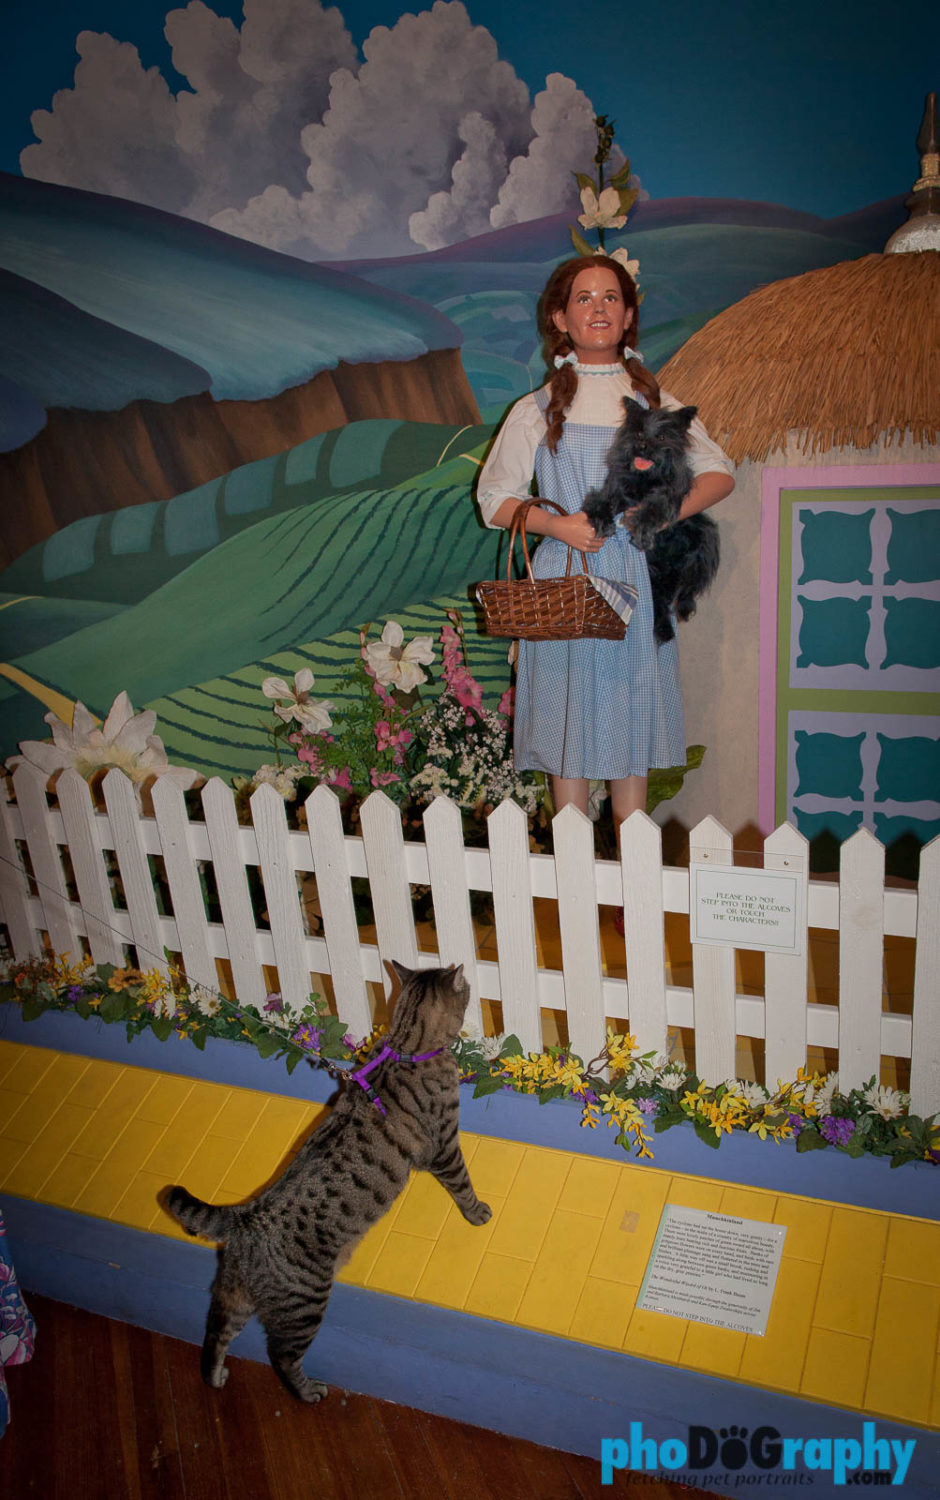 Cats, Kansas, Oz Museum, Oz museum, The Oz Museum, Tourism, Travel, Traveling with a cat, U.S., USA, United States, Wamego, animals, leashed cat, on a leash, phoDOGraphy, traveling cat, traveling with cats